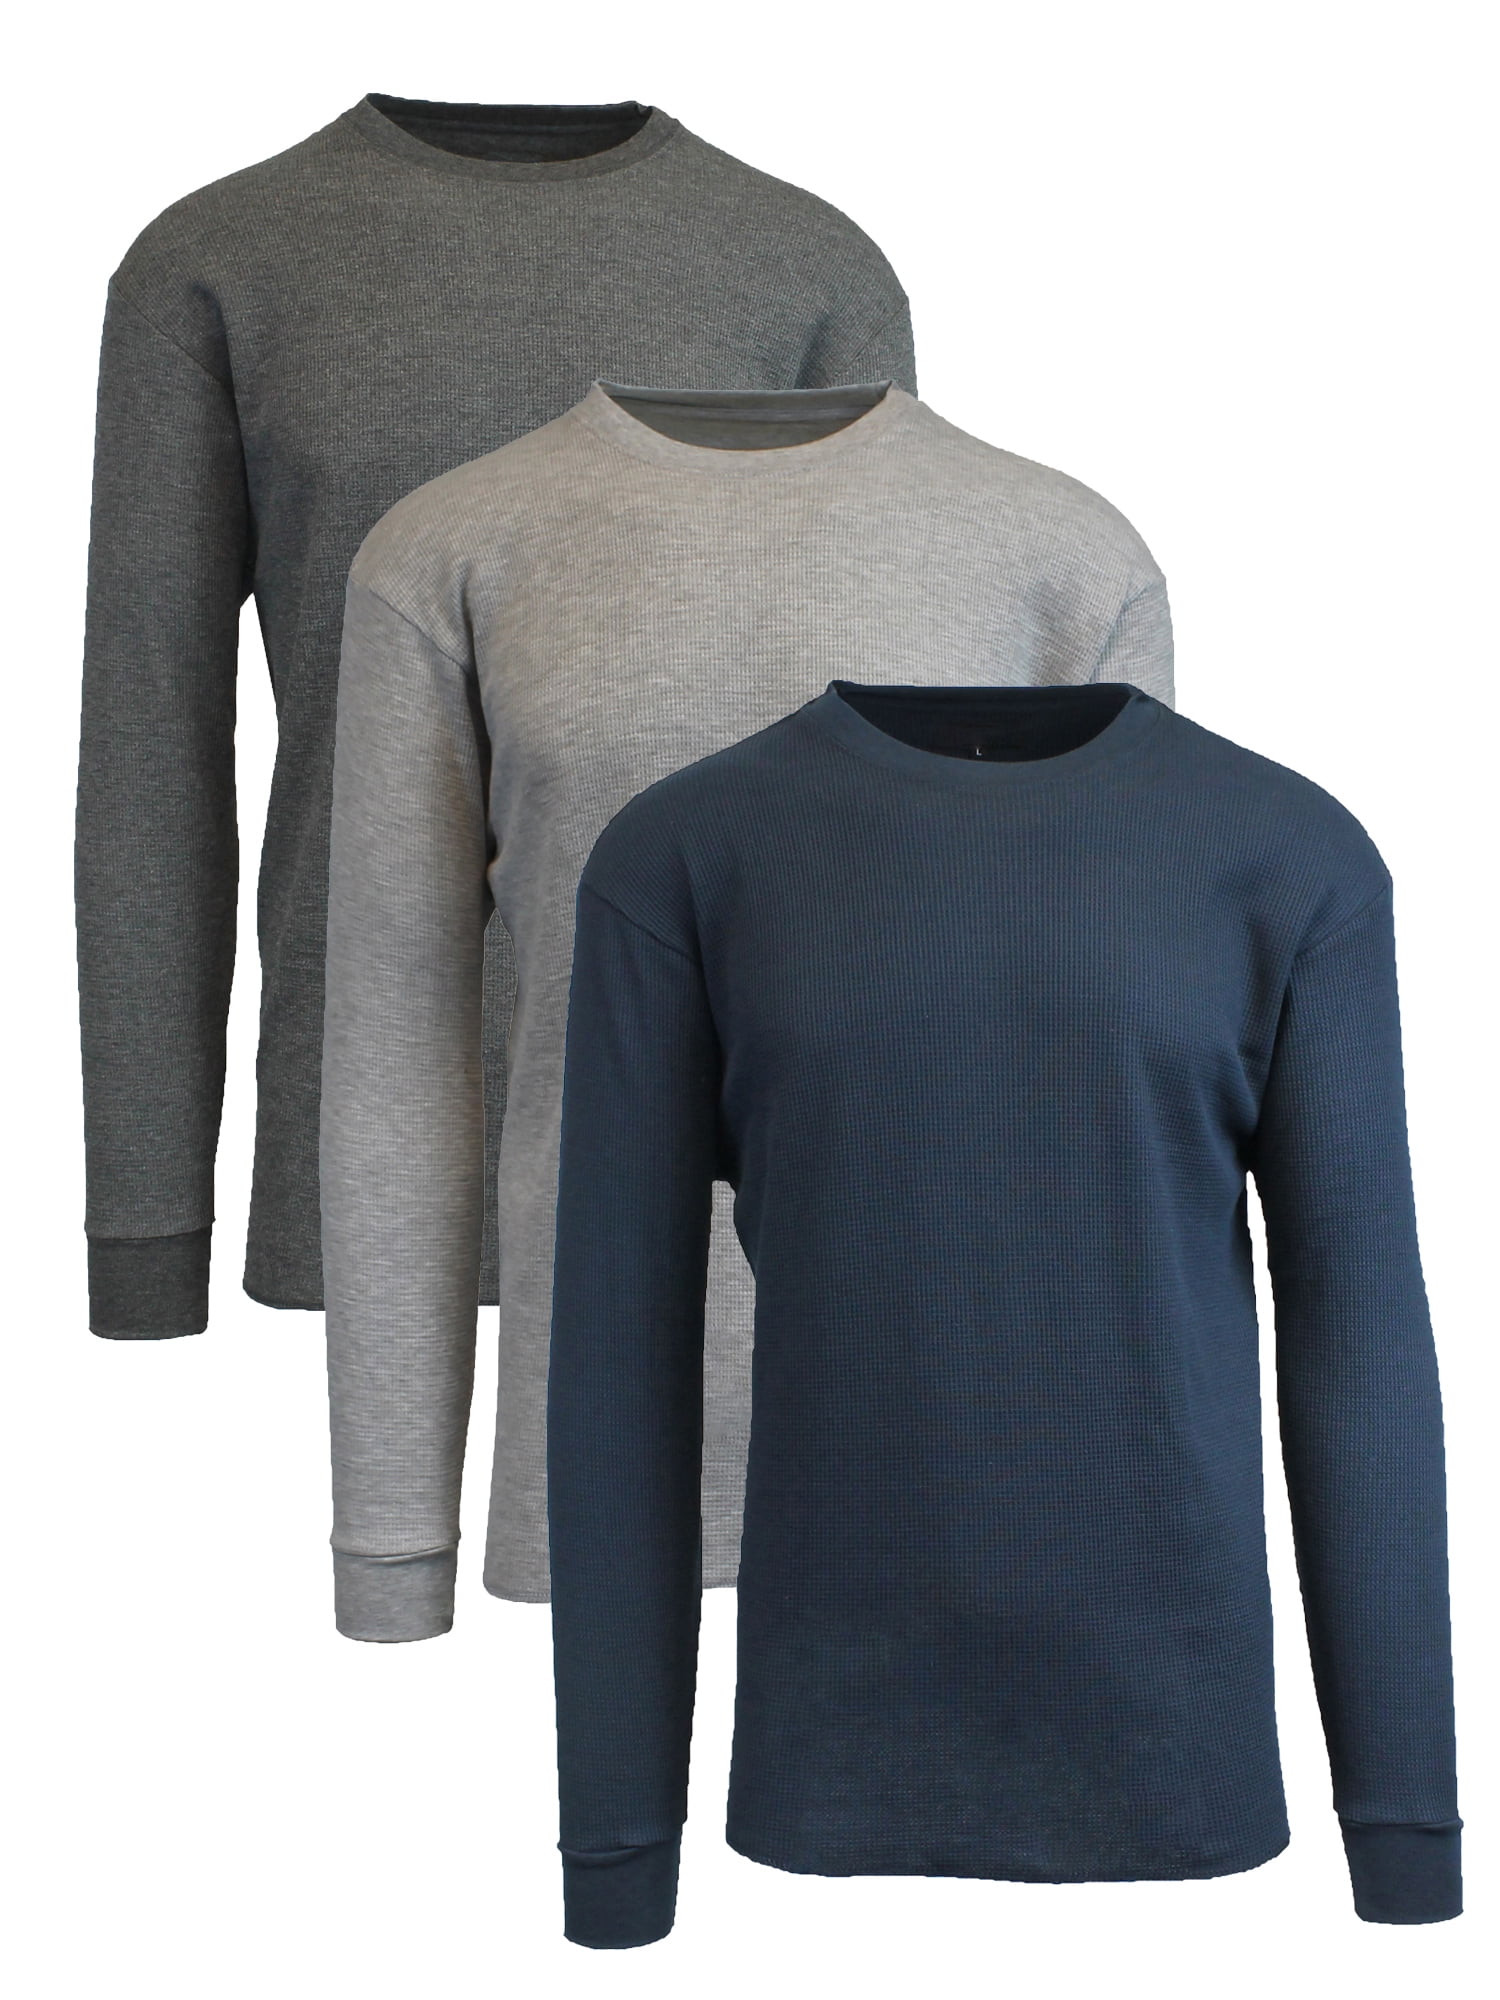 Primark men's Long Sleeve Grey Thermal Tops Size Large (L) 41-43in Chest X  2 - Shopping.com